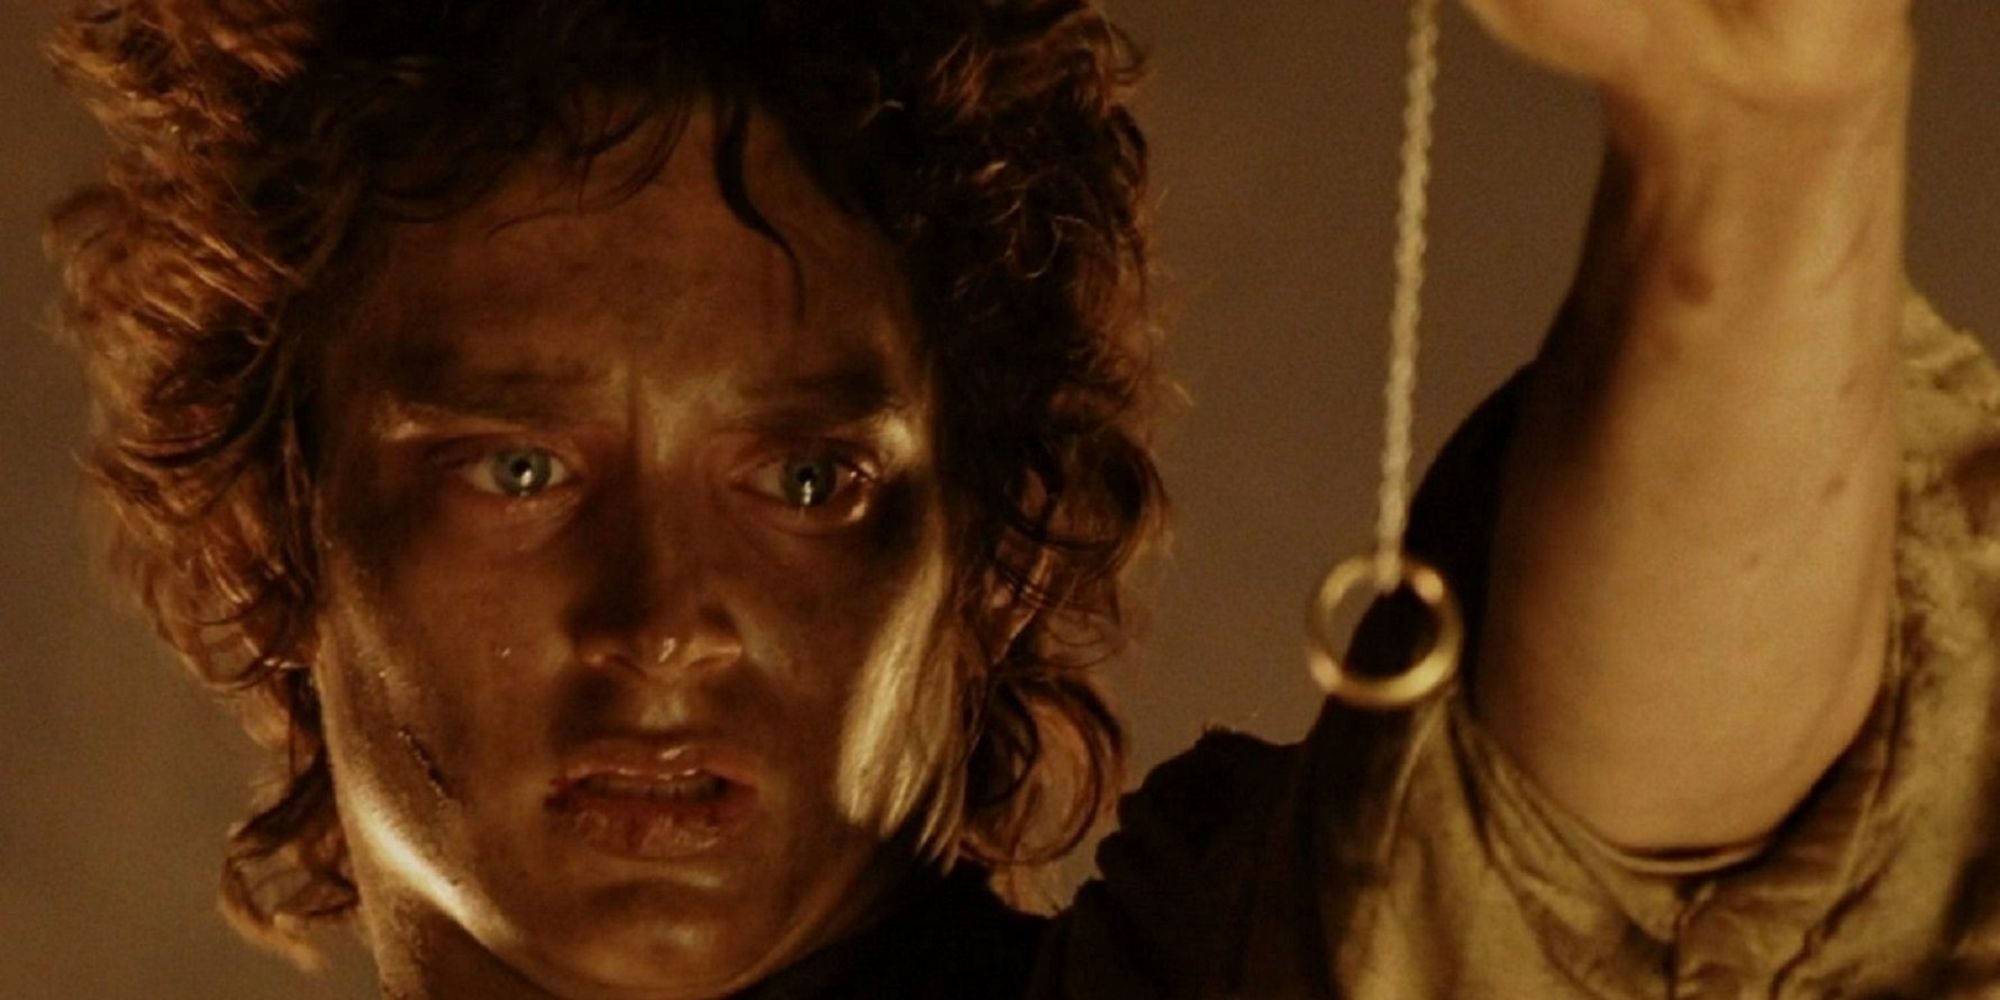 Elijah Wood covered in dirt and soot as Frodo, gazing longingly at the One Ring